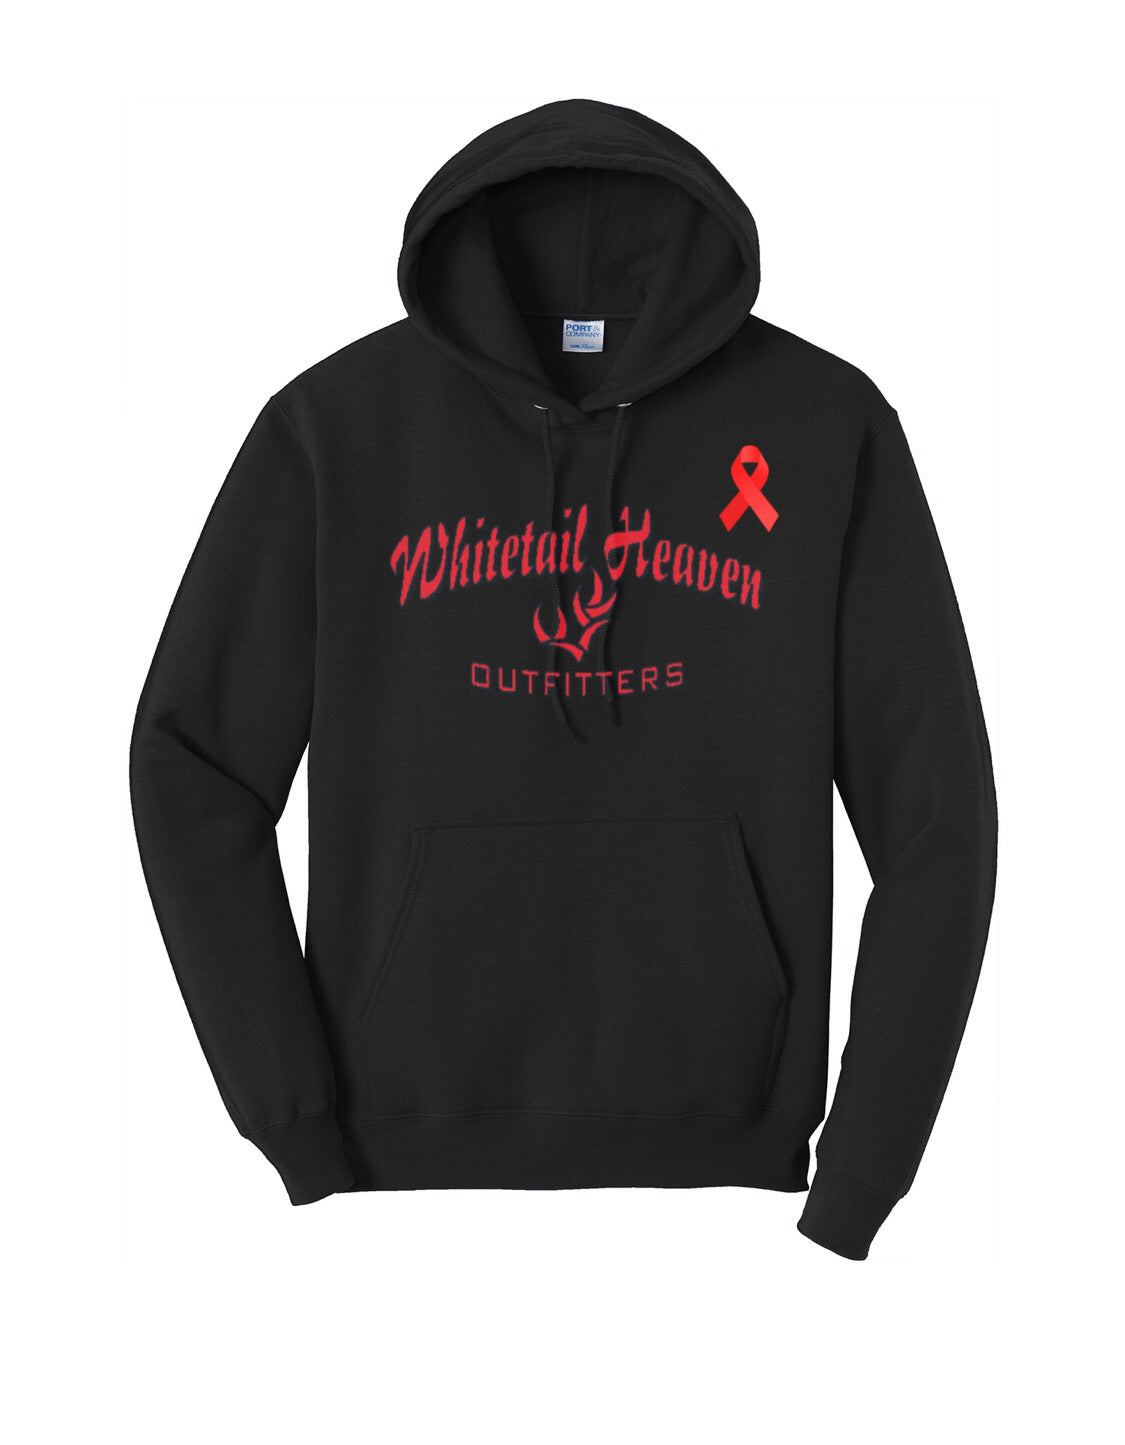 LIMITED EDITION WHITETAIL HEAVEN AIDS AWARENESS PULLOVER HOODED SWEATSHIRT